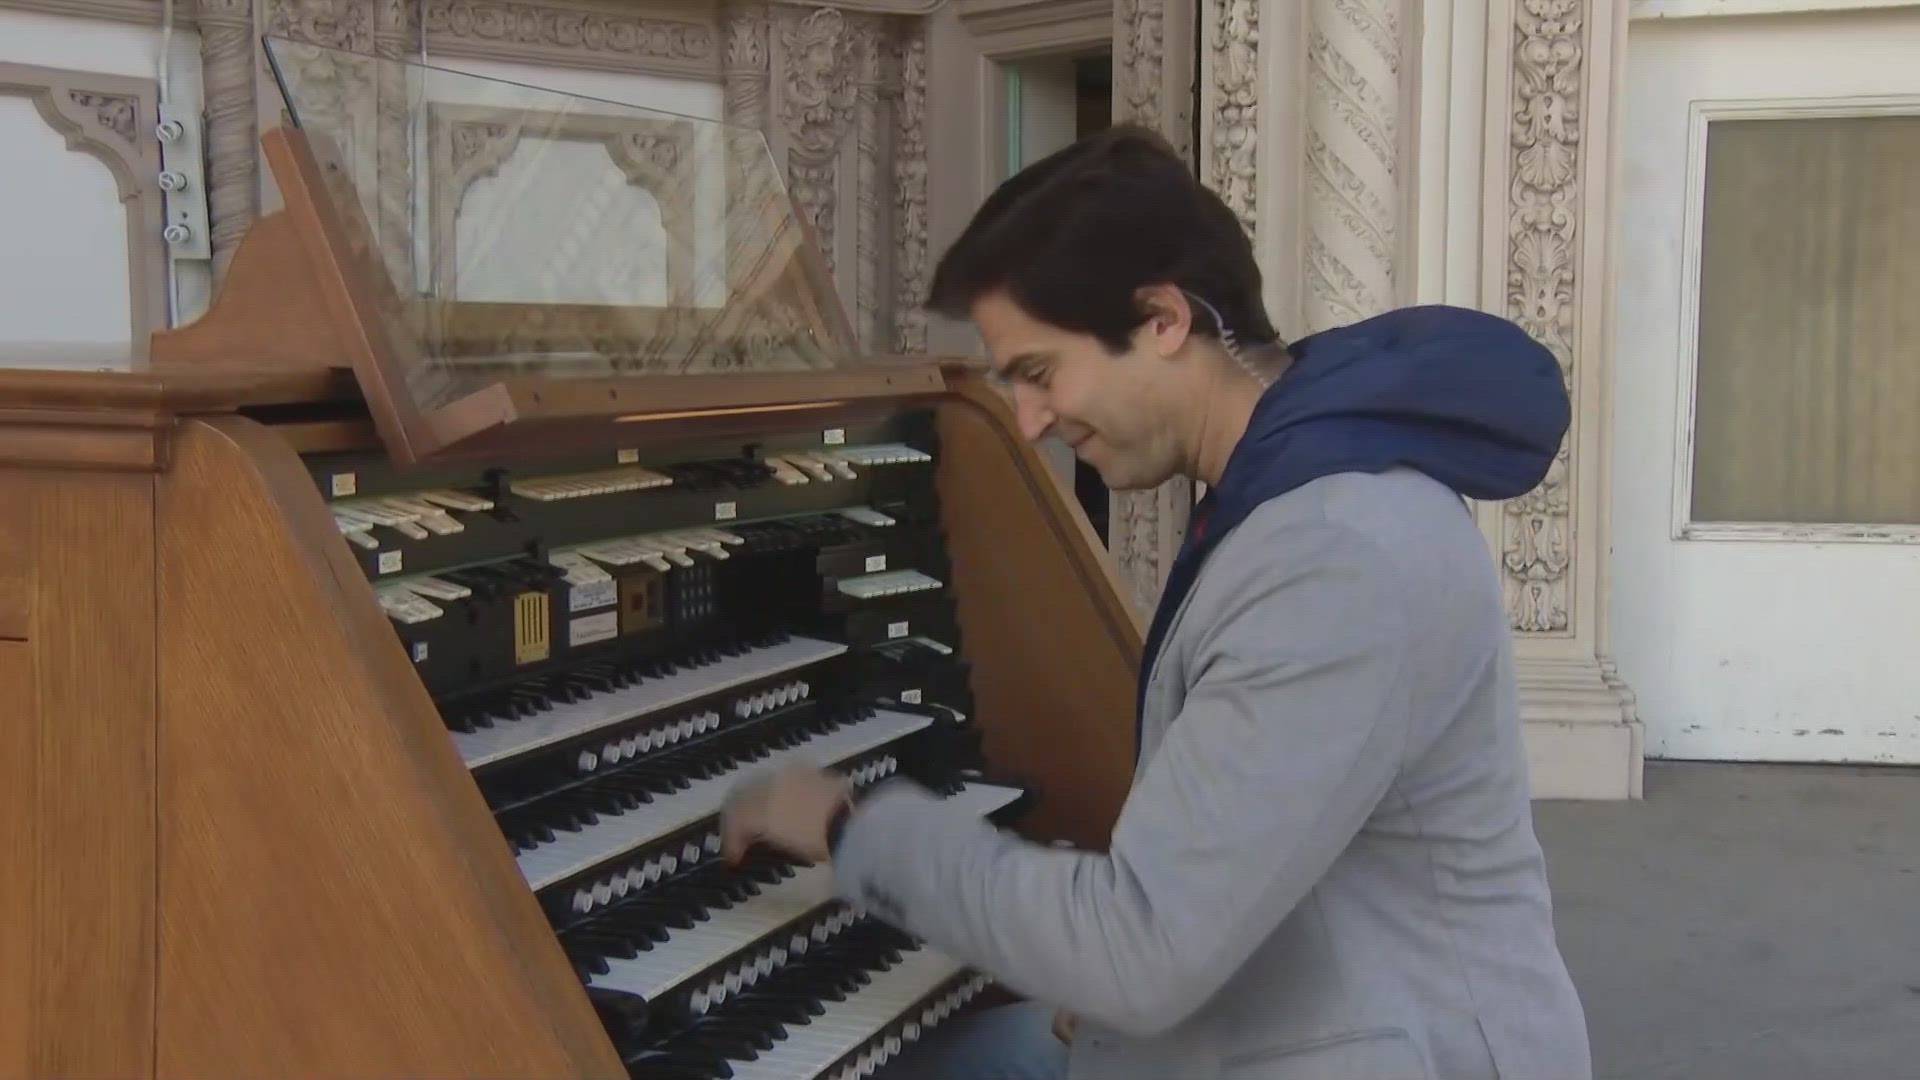 This Sunday at 2pm, you can enjoy a free concert to celebrate Johann Sebastian Bach. San Diego Civic Organist Raul Prieto Ramirez talks to CBS 8 about the event.